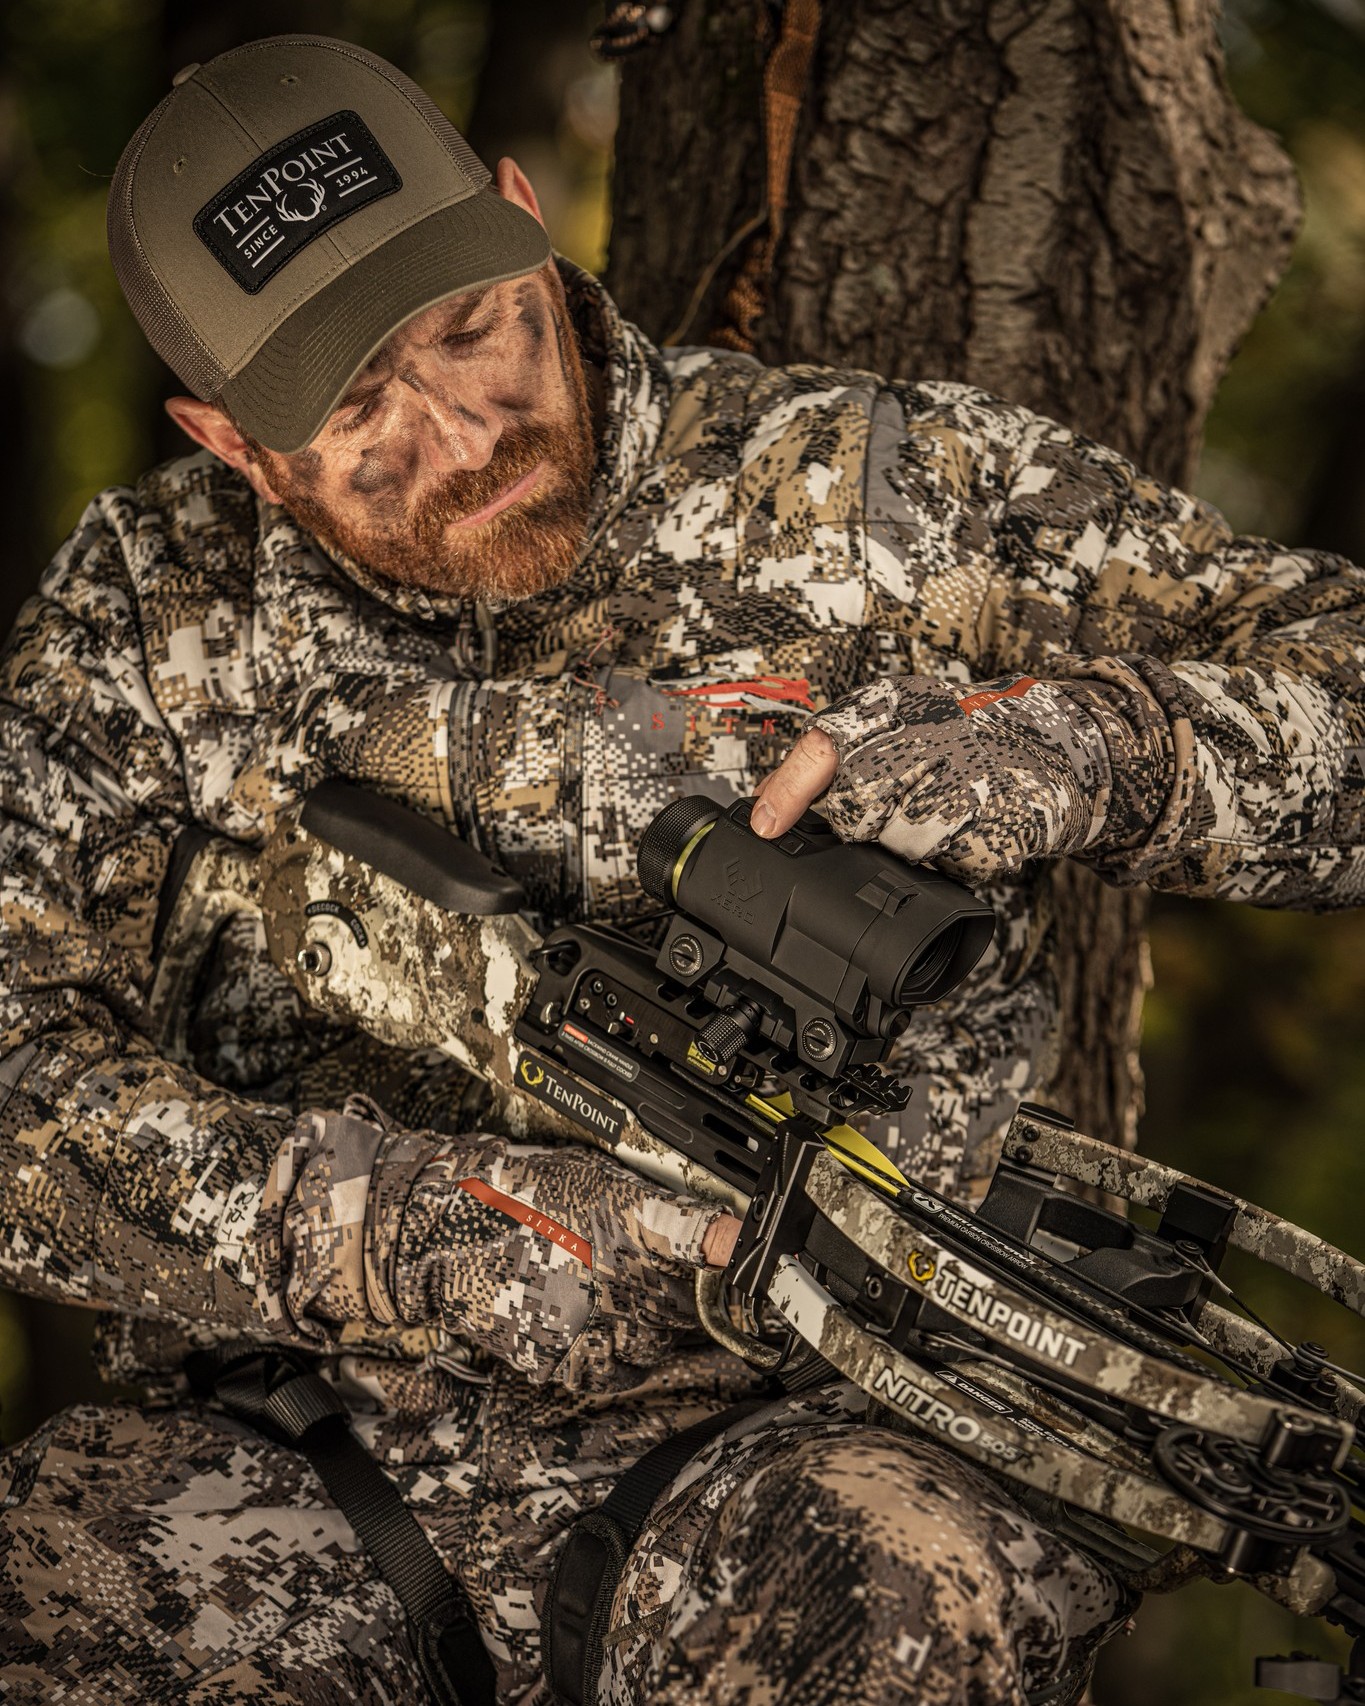 The New Nitro 505 from TenPoint Crossbows - The Fastest Crossbow Ever